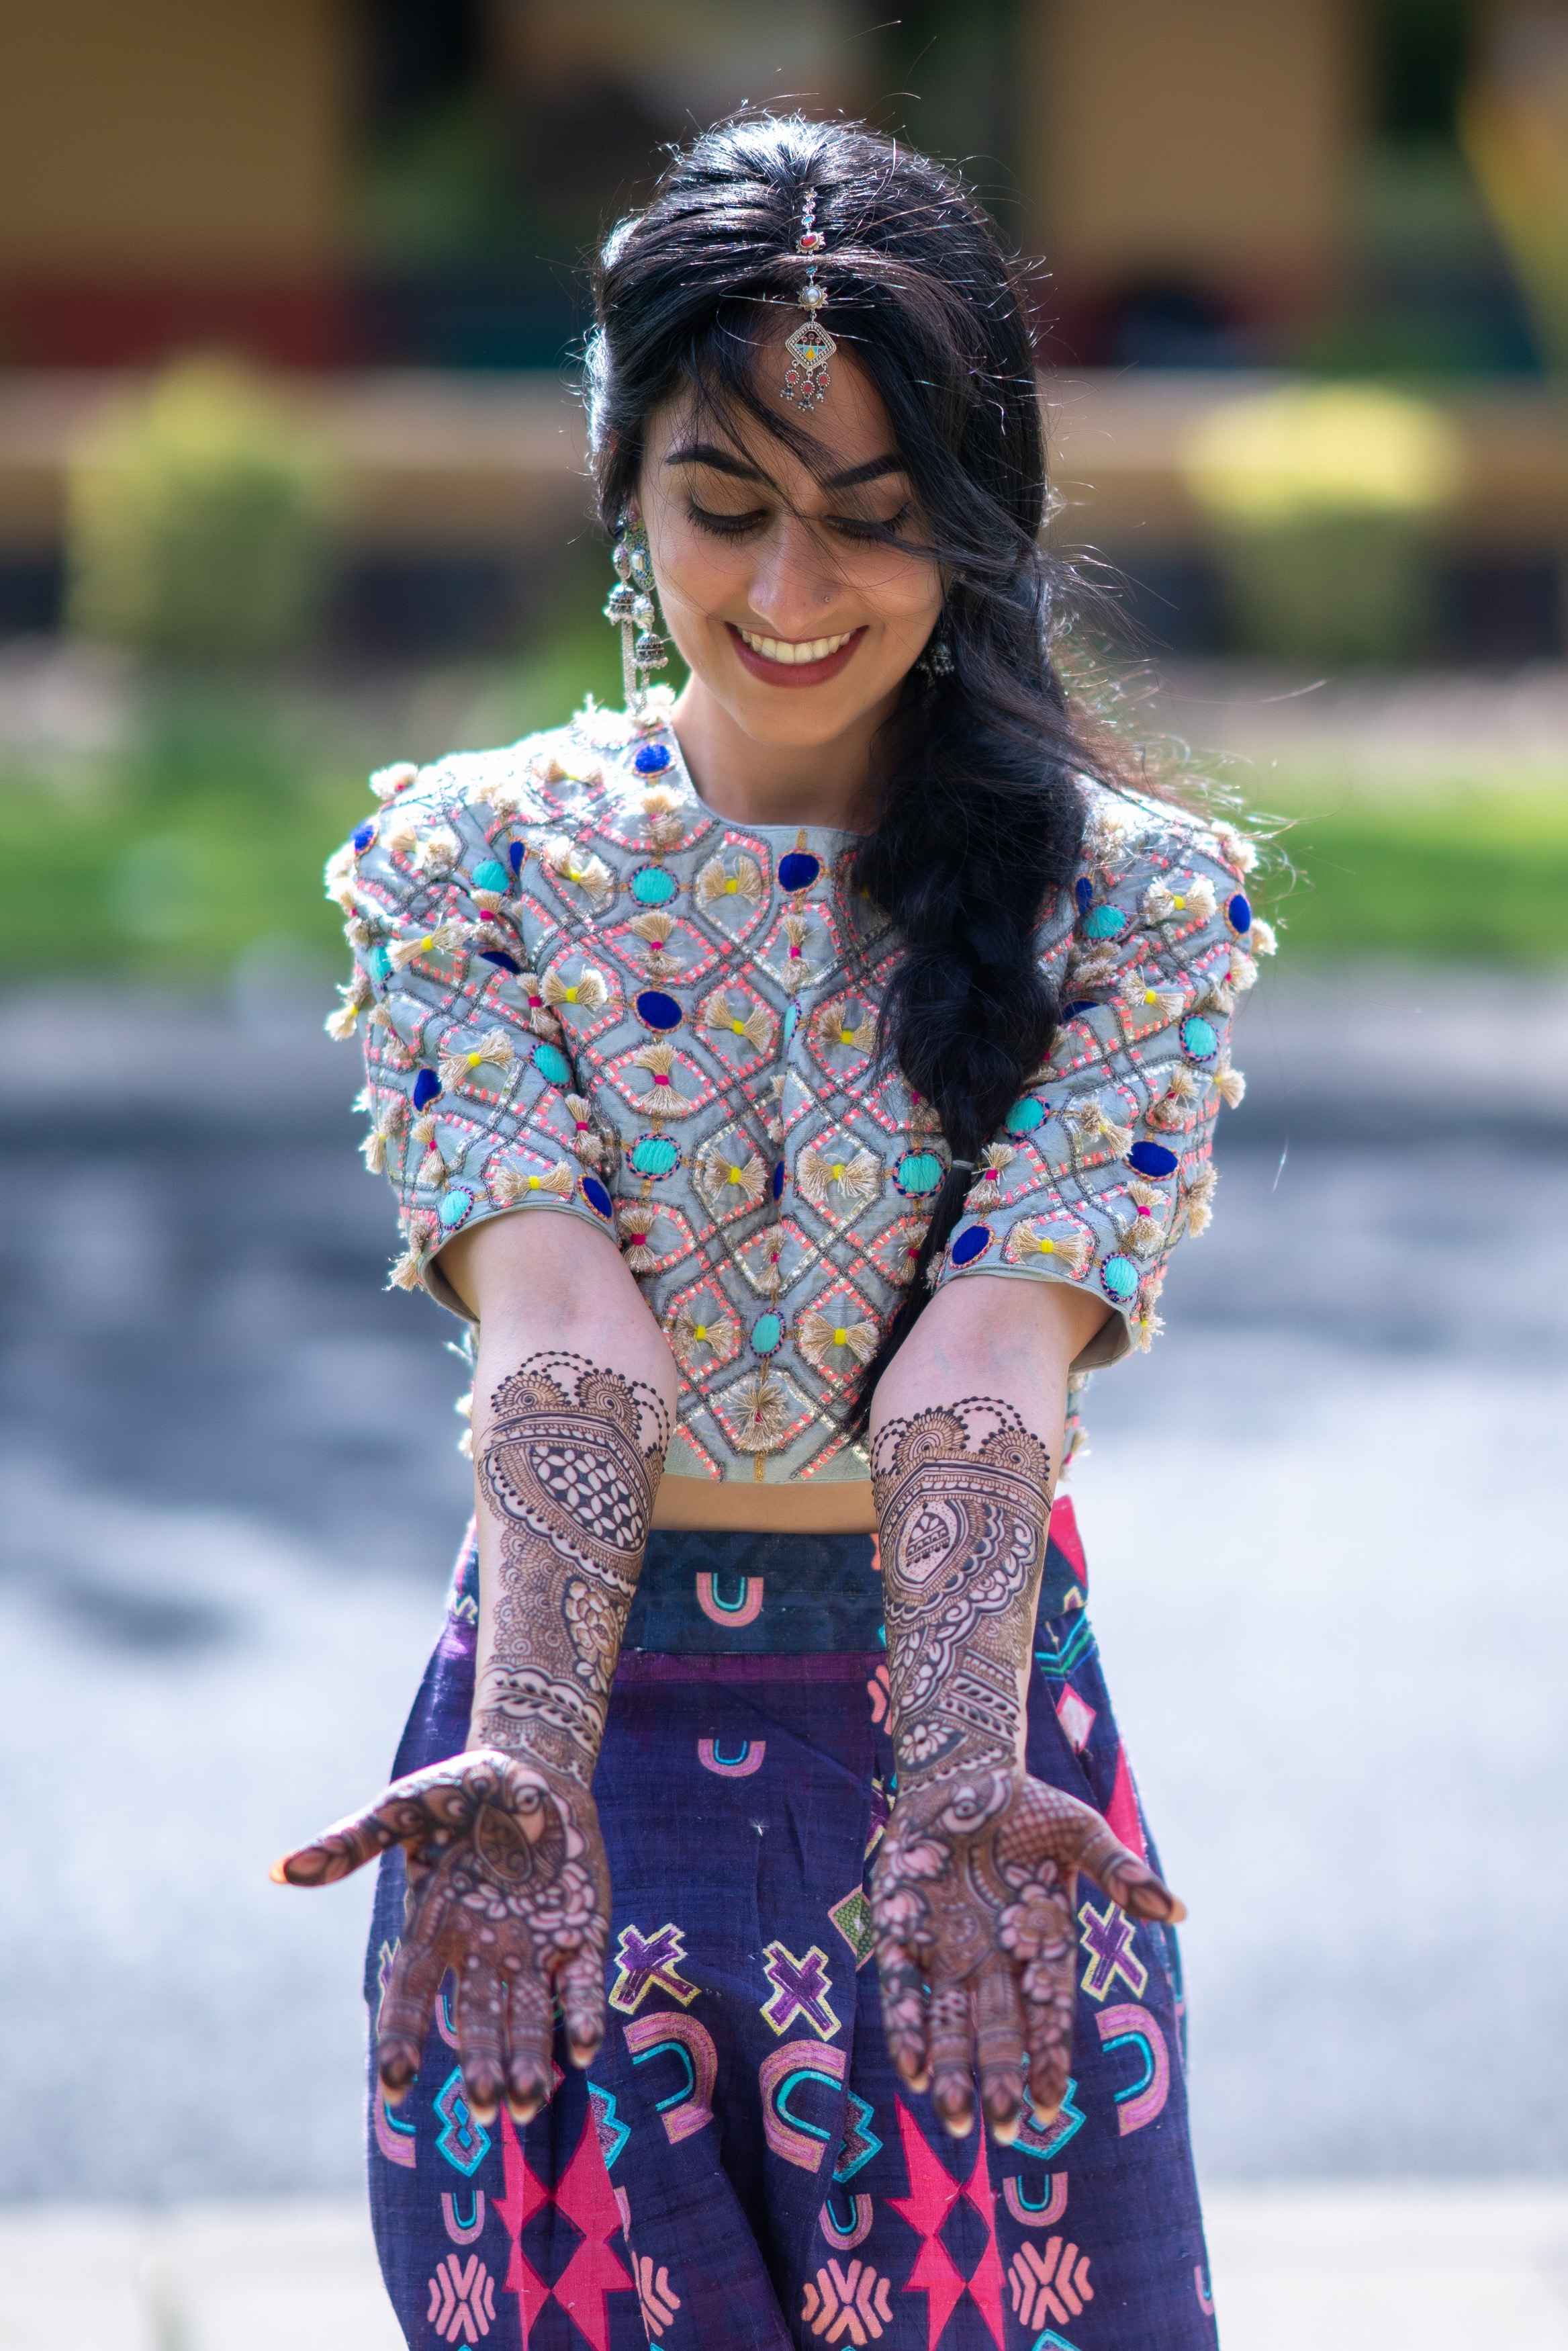 This California Bride Had A Magnificent Multicultural Wedding